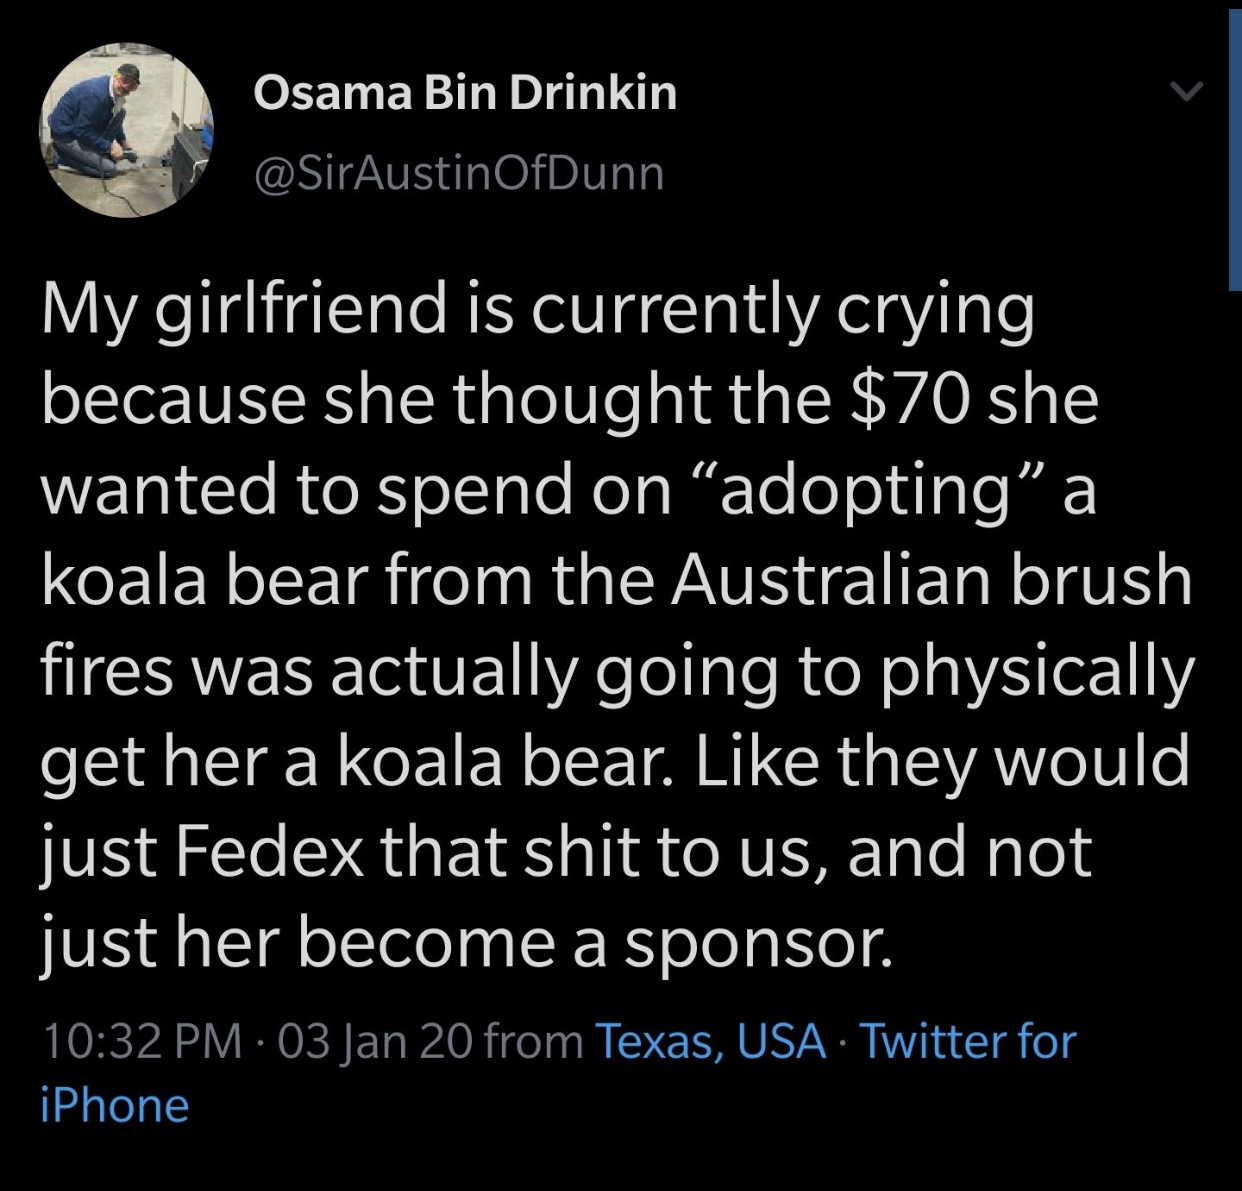 atmosphere - Osama Bin Drinkin OfDunn My girlfriend is currently crying because she thought the $70 she wanted to spend on adopting a koala bear from the Australian brush fires was actually going to physically get her a koala bear. they would just Fedex t